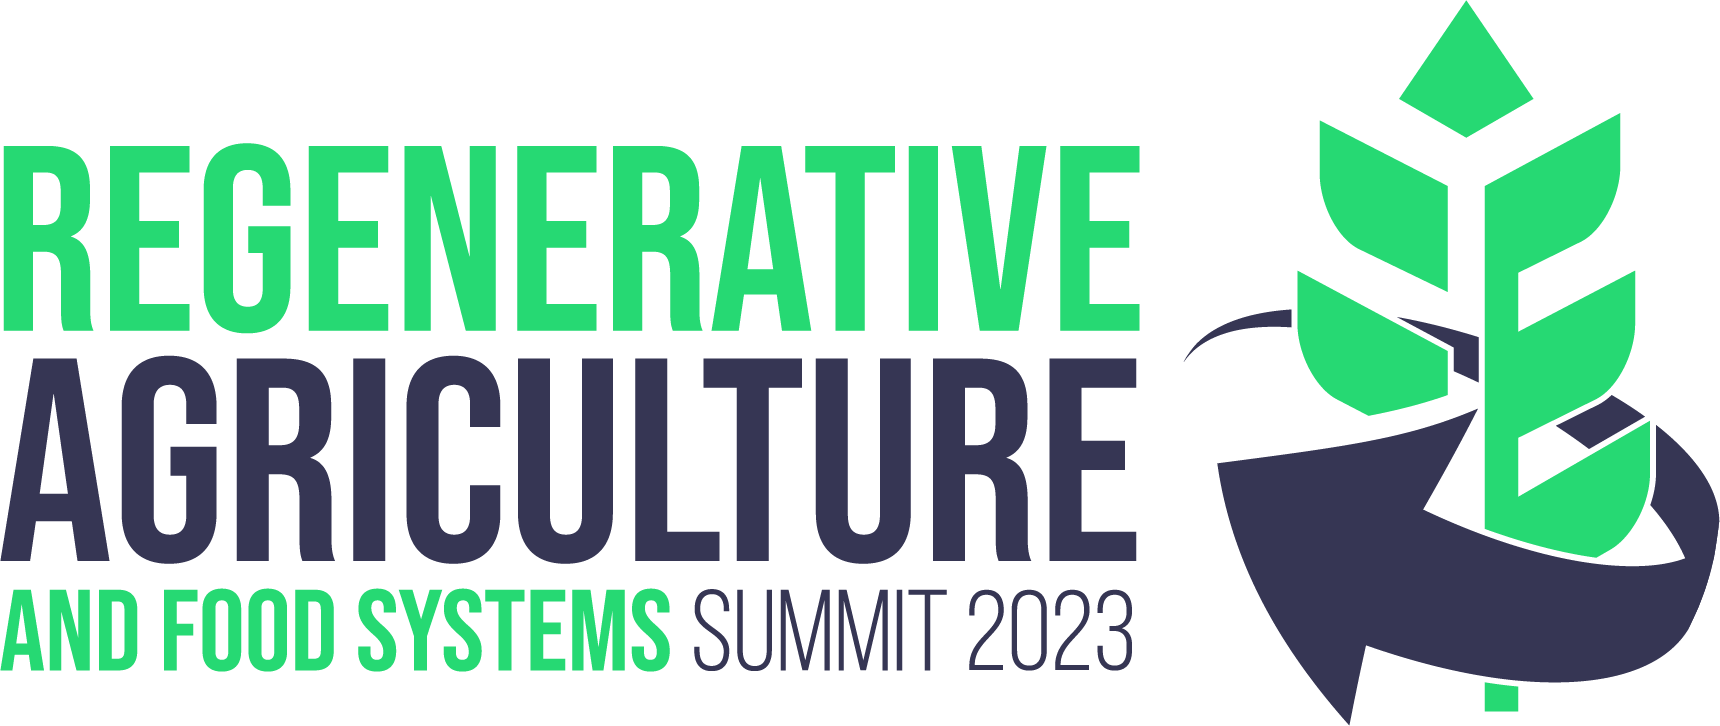 Regenerative Agriculture & Food Systems Summit 2023